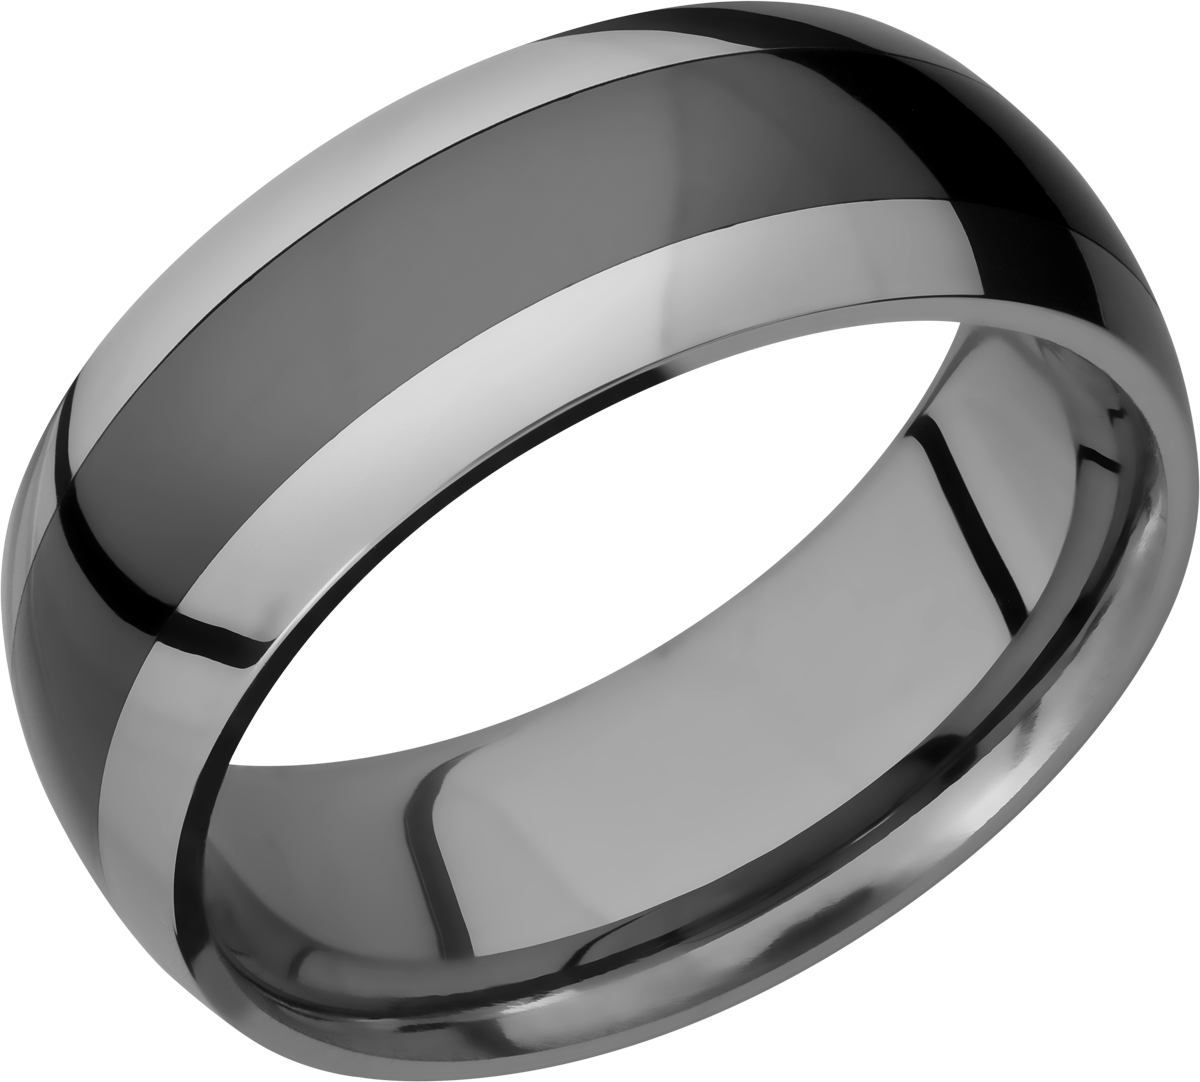 Tungsten ceramic band that is 8mm wide, with a black center and silver color edges. SAND